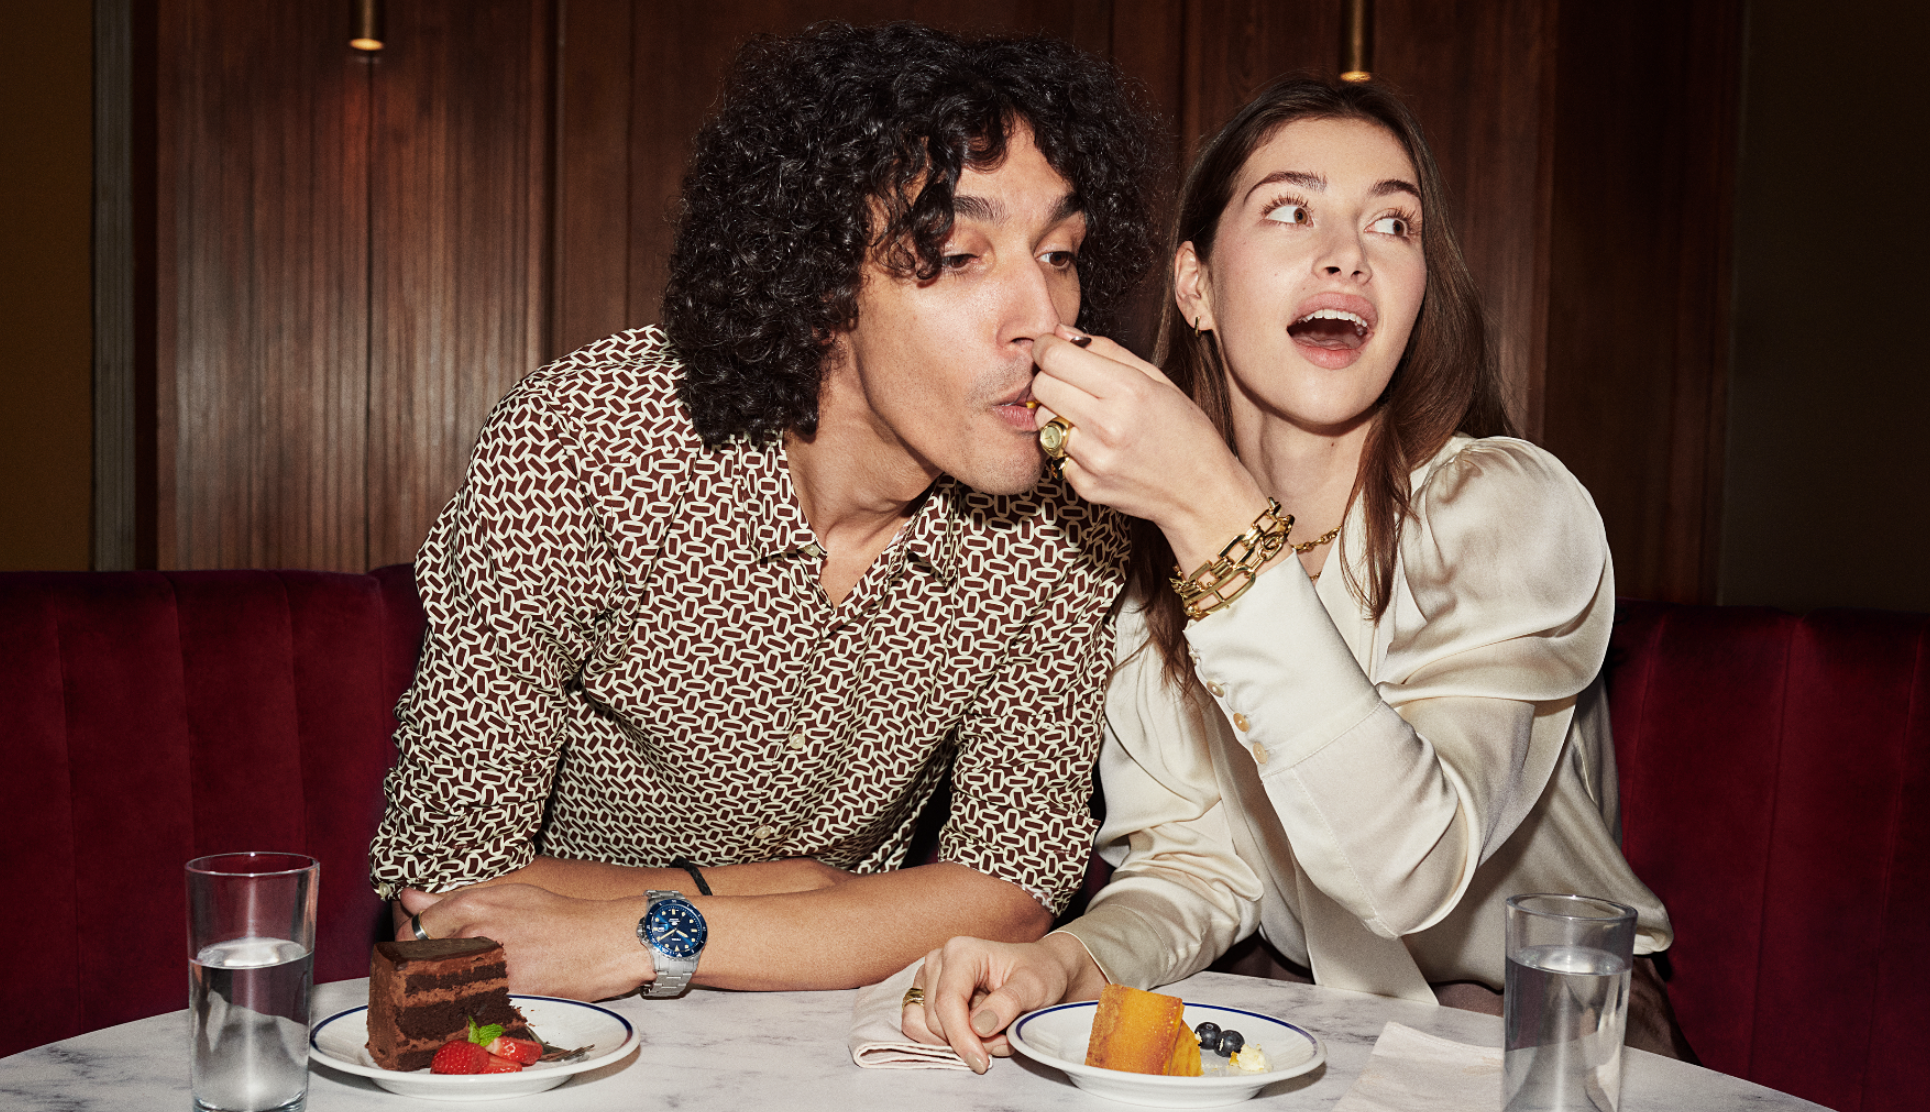 Woman feeding man food at bar while wearing fossil accessories